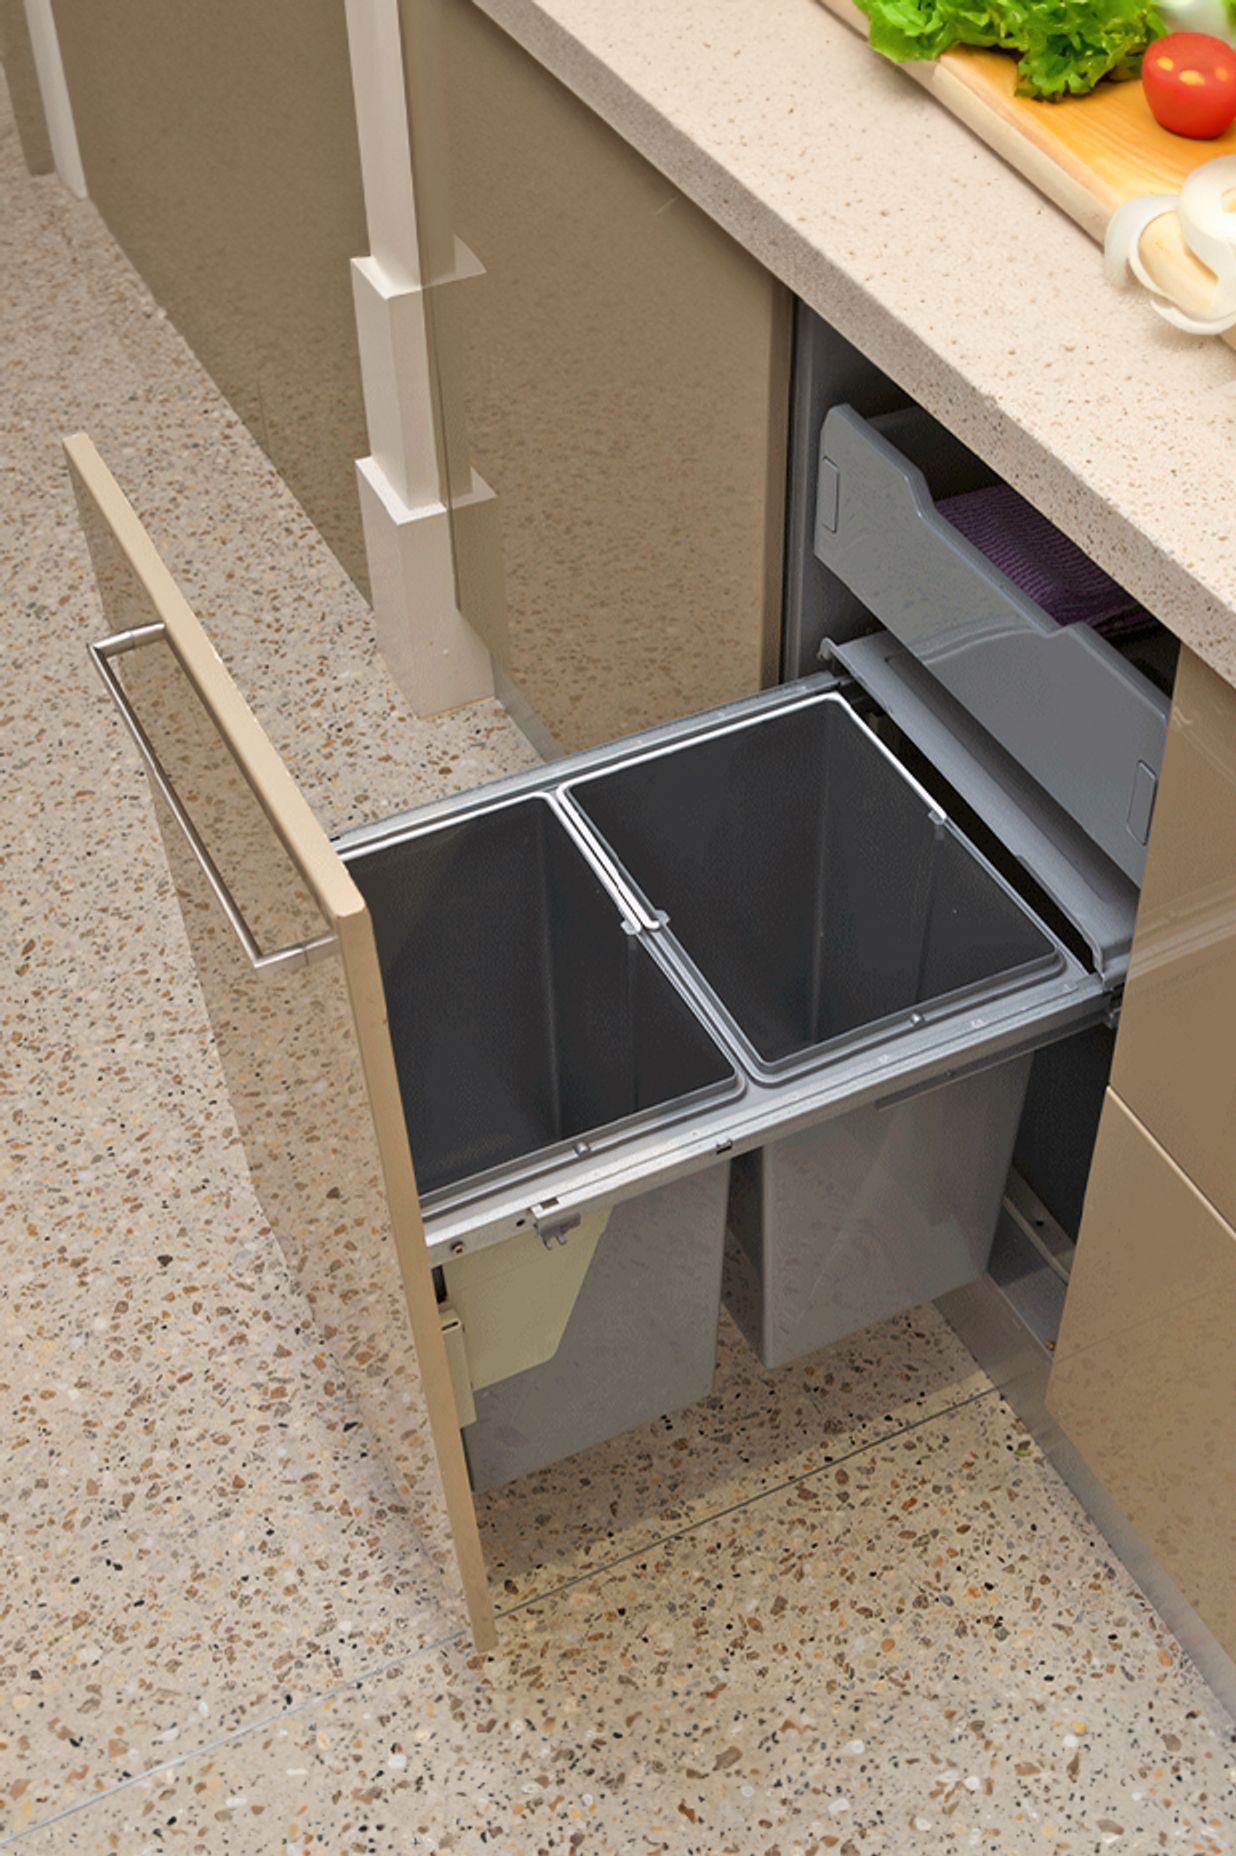 Bins are a must-have in the kitchen and the options available today mean everything is hidden away.